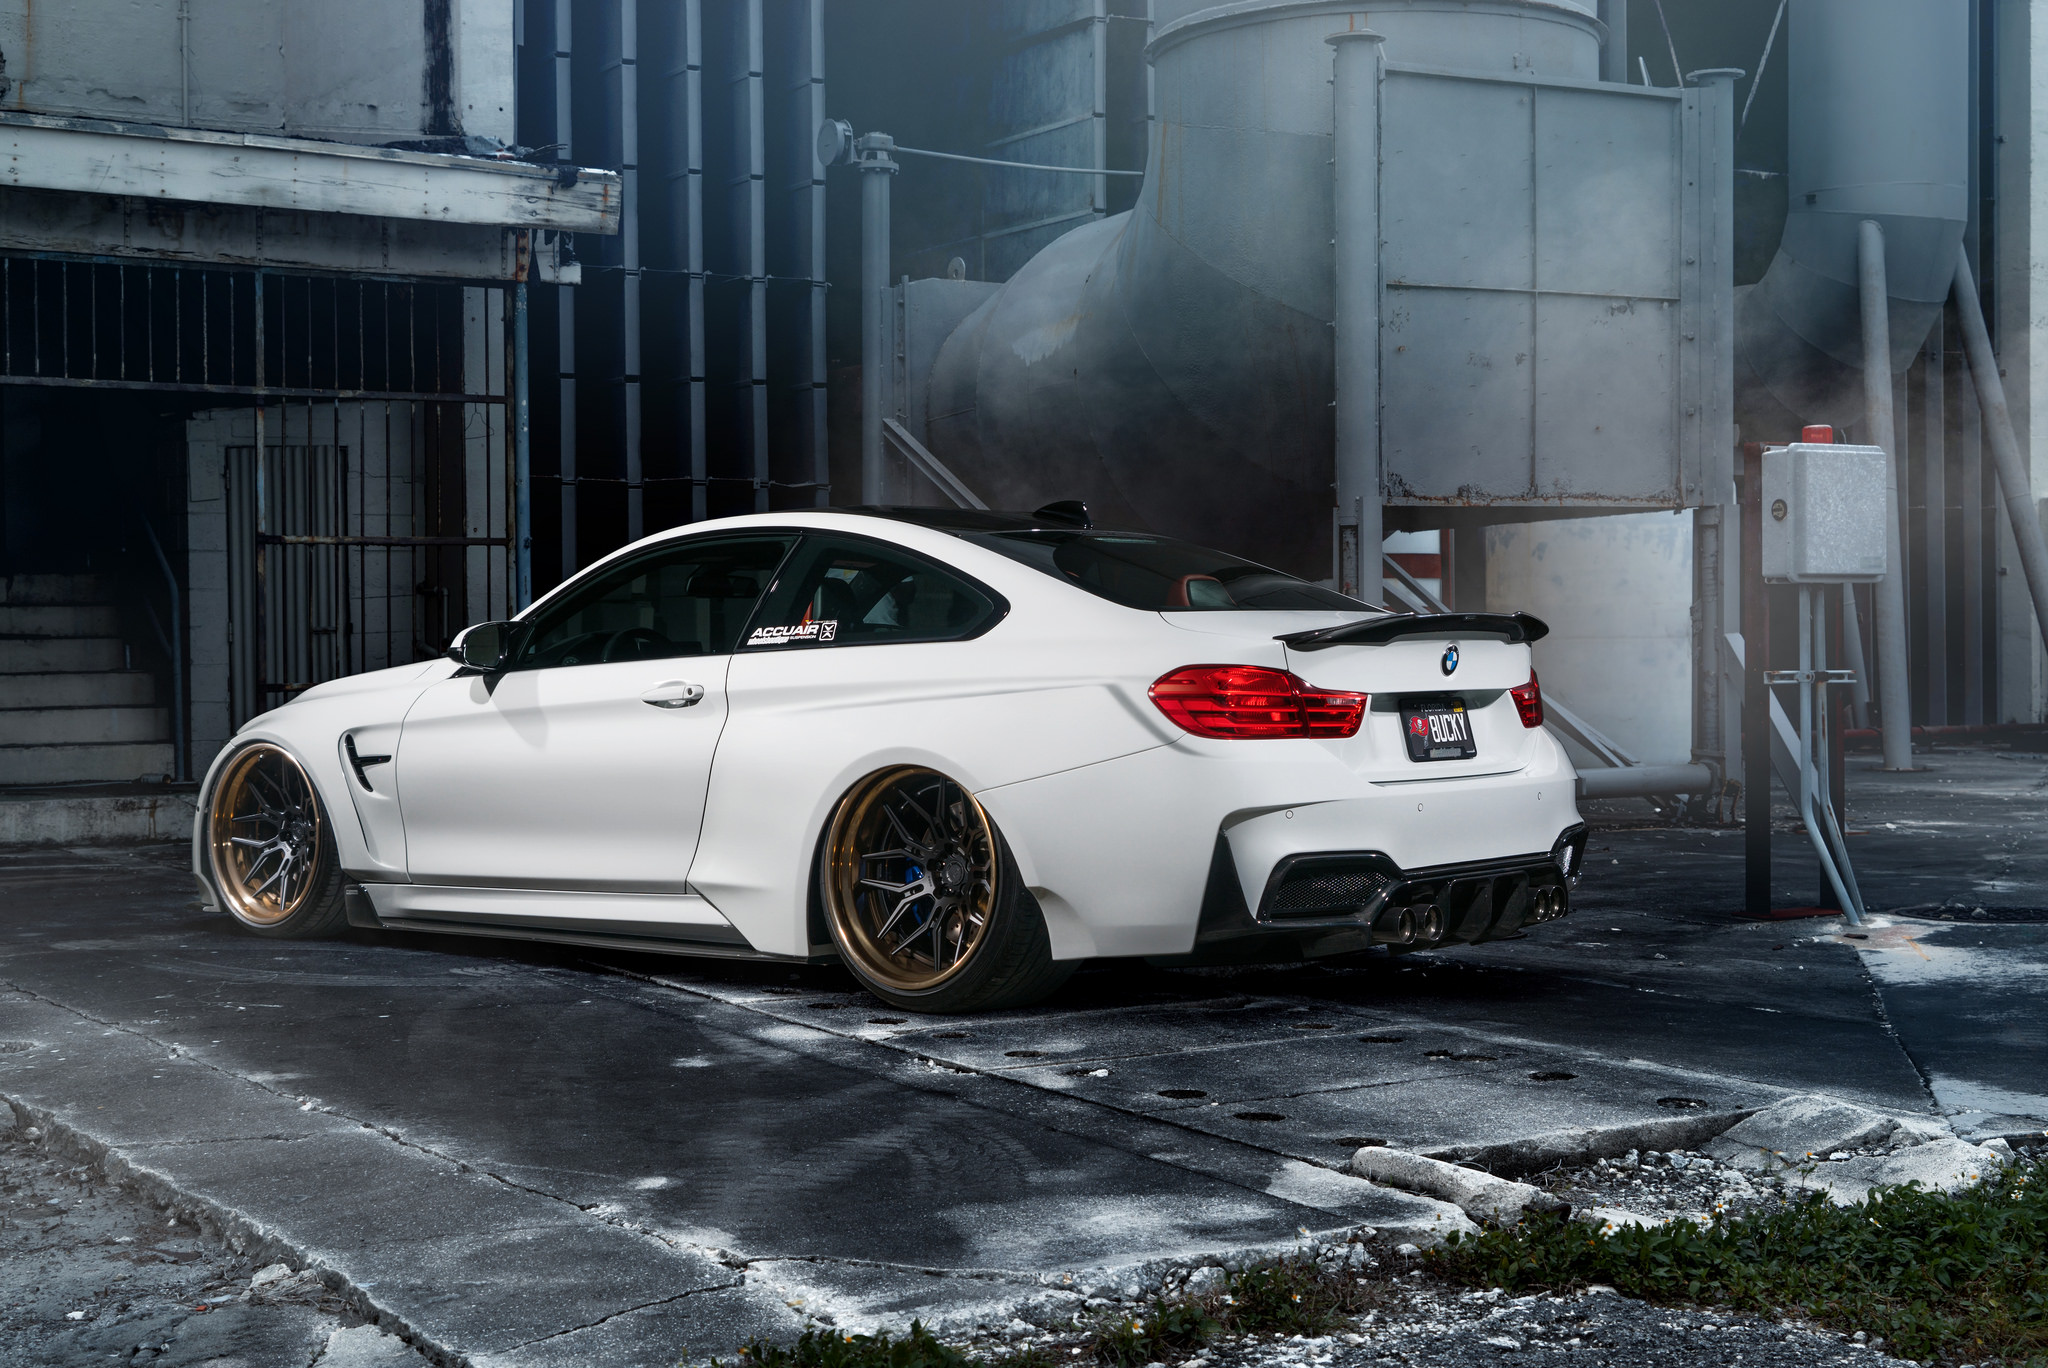 Gorgeous Alpine White M4 Widebody By William Stern - Bmw M4 Widebody , HD Wallpaper & Backgrounds